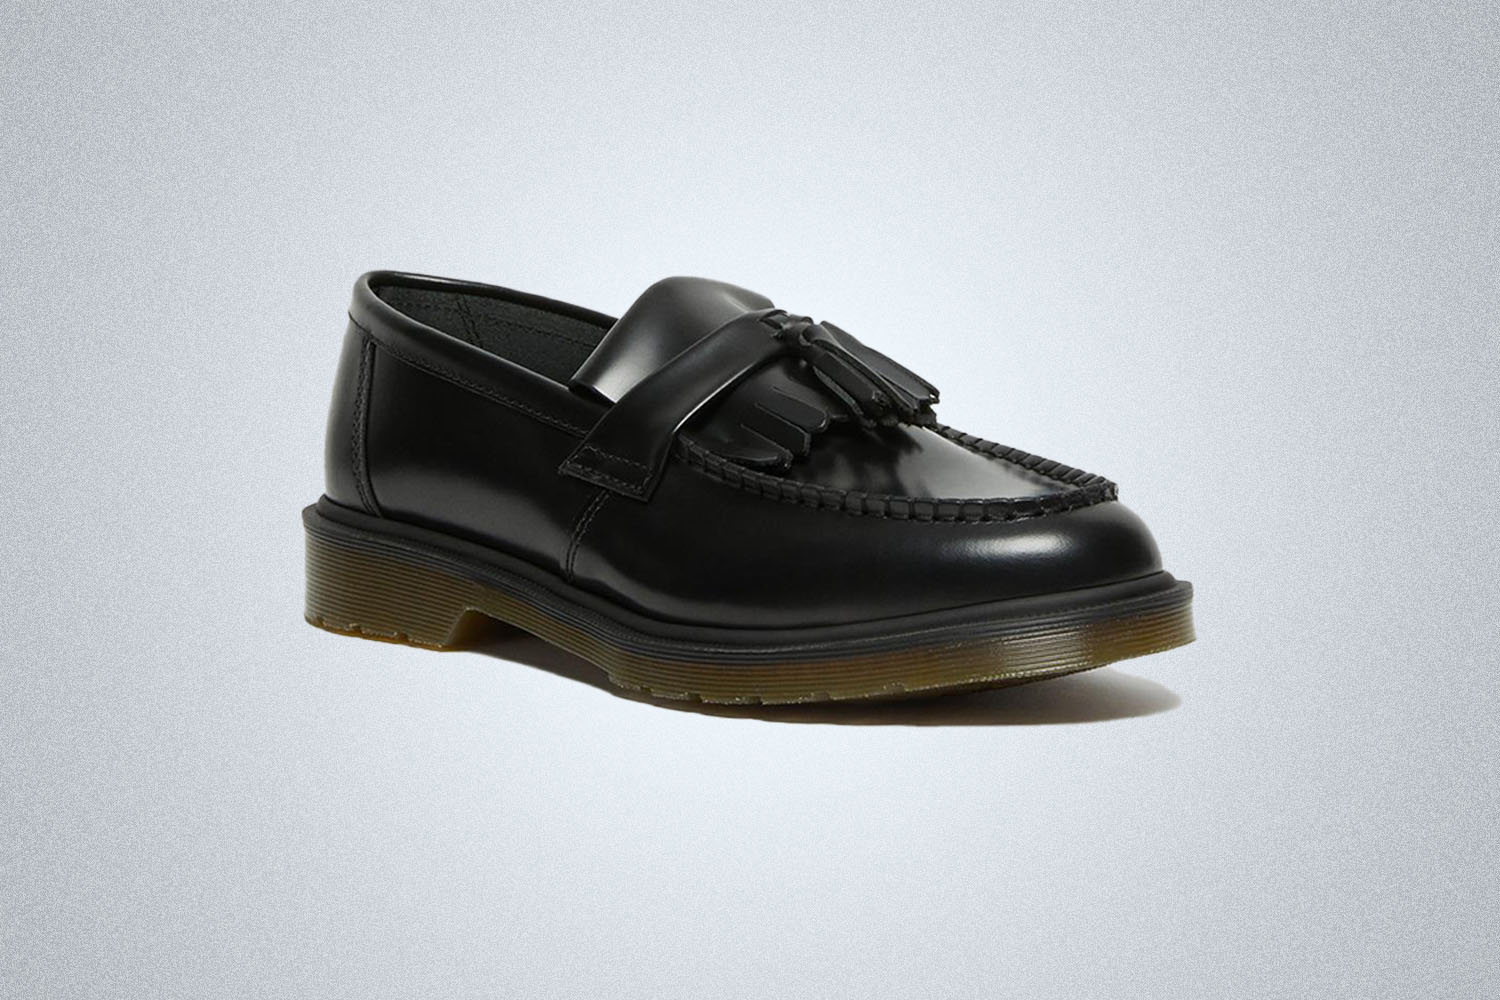 A pair of black leather loafers from Doc Martens on a grey background